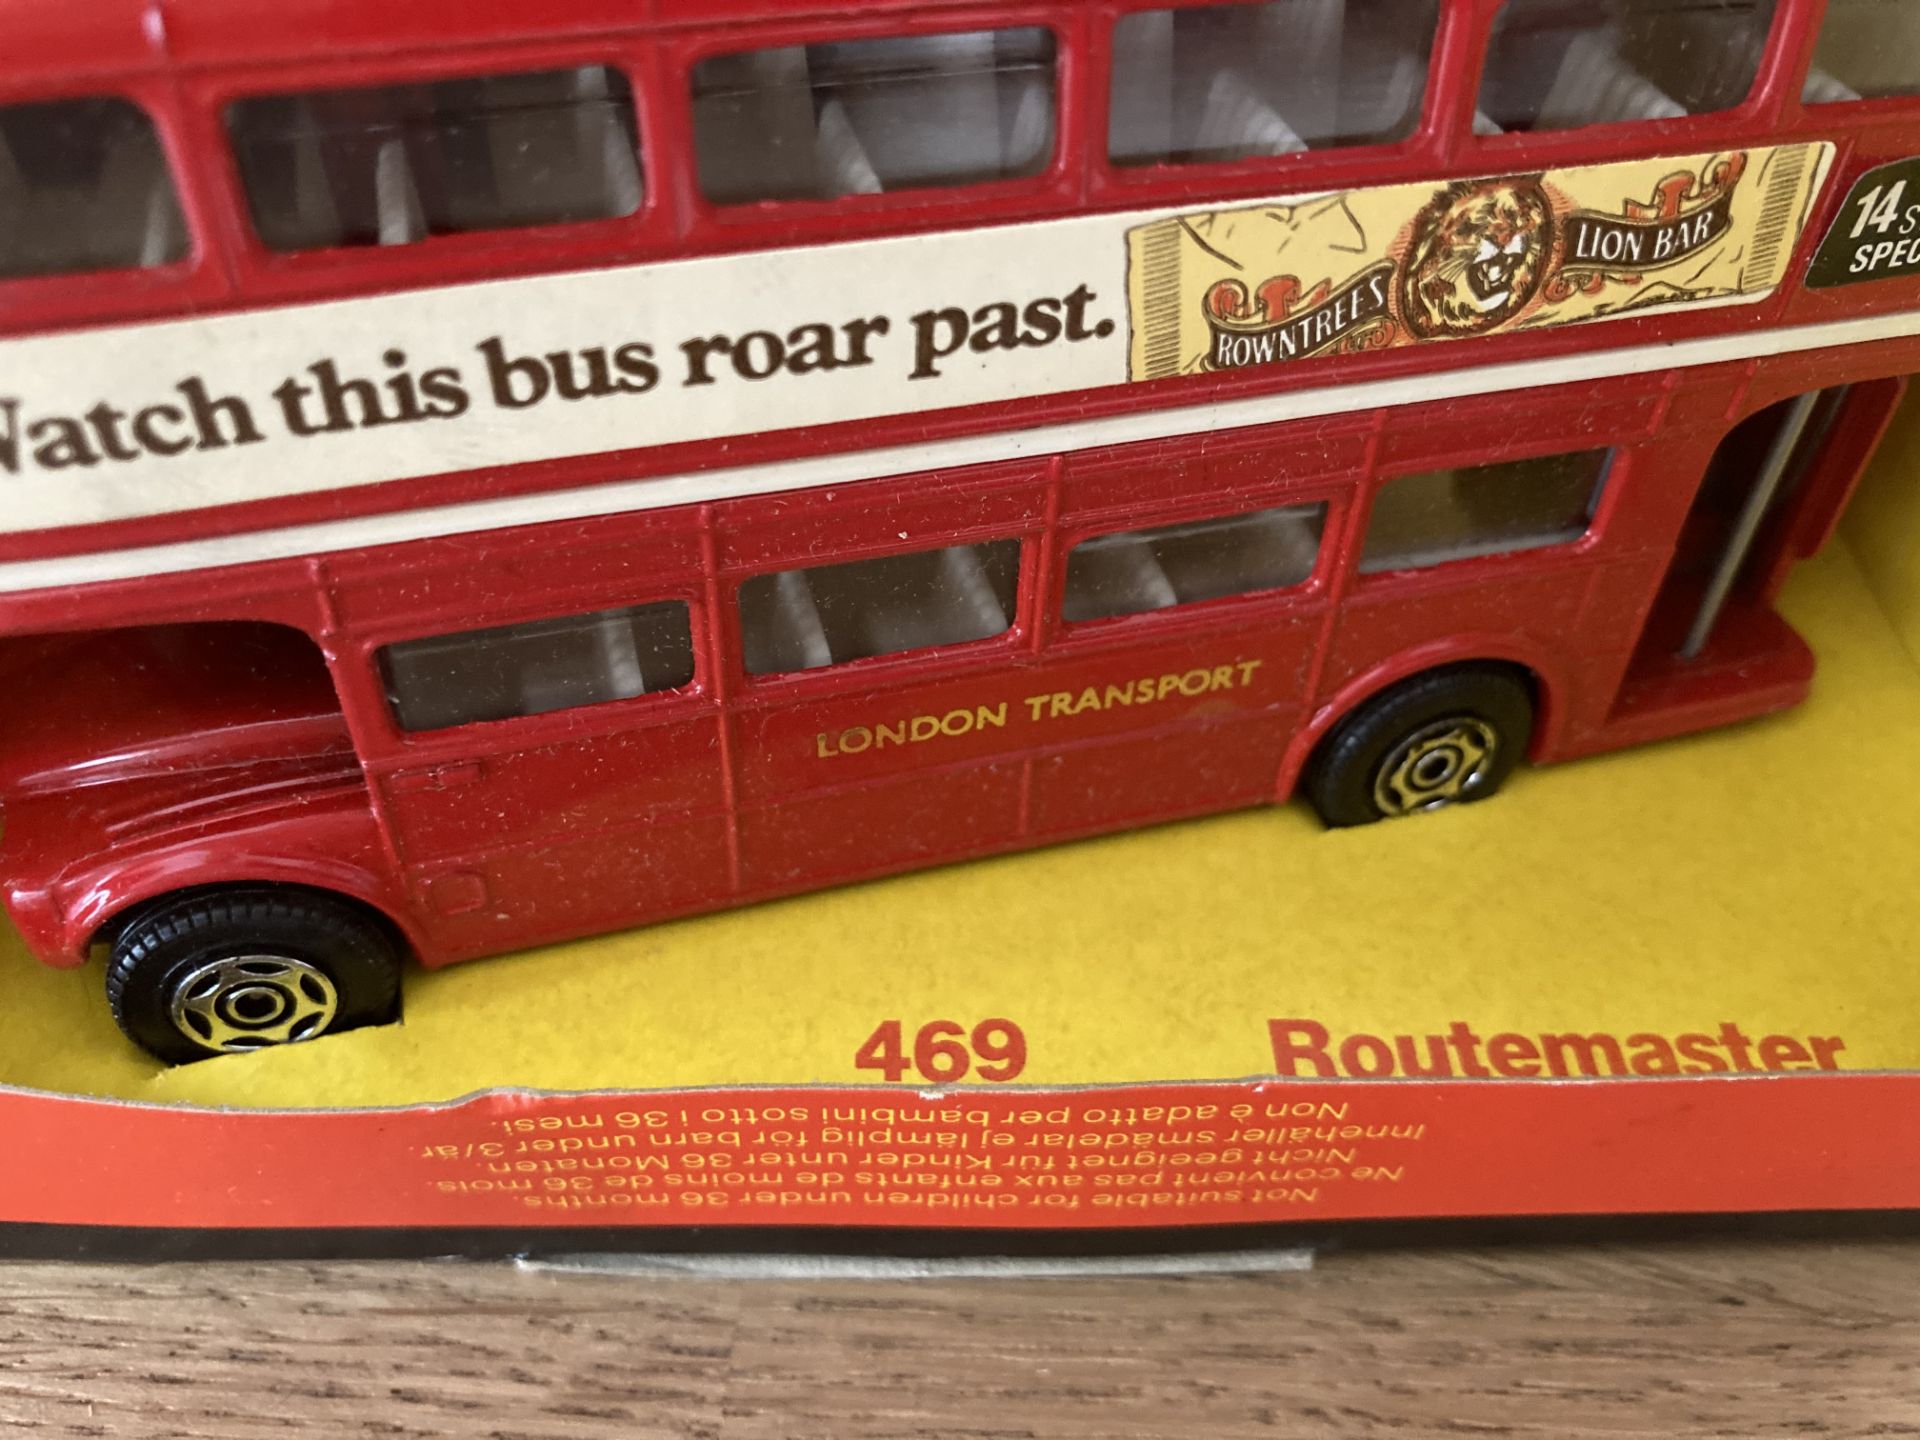 Corgi London Transport, Red Watch This Bus Roar Past Routemaster - 469 - Image 3 of 3